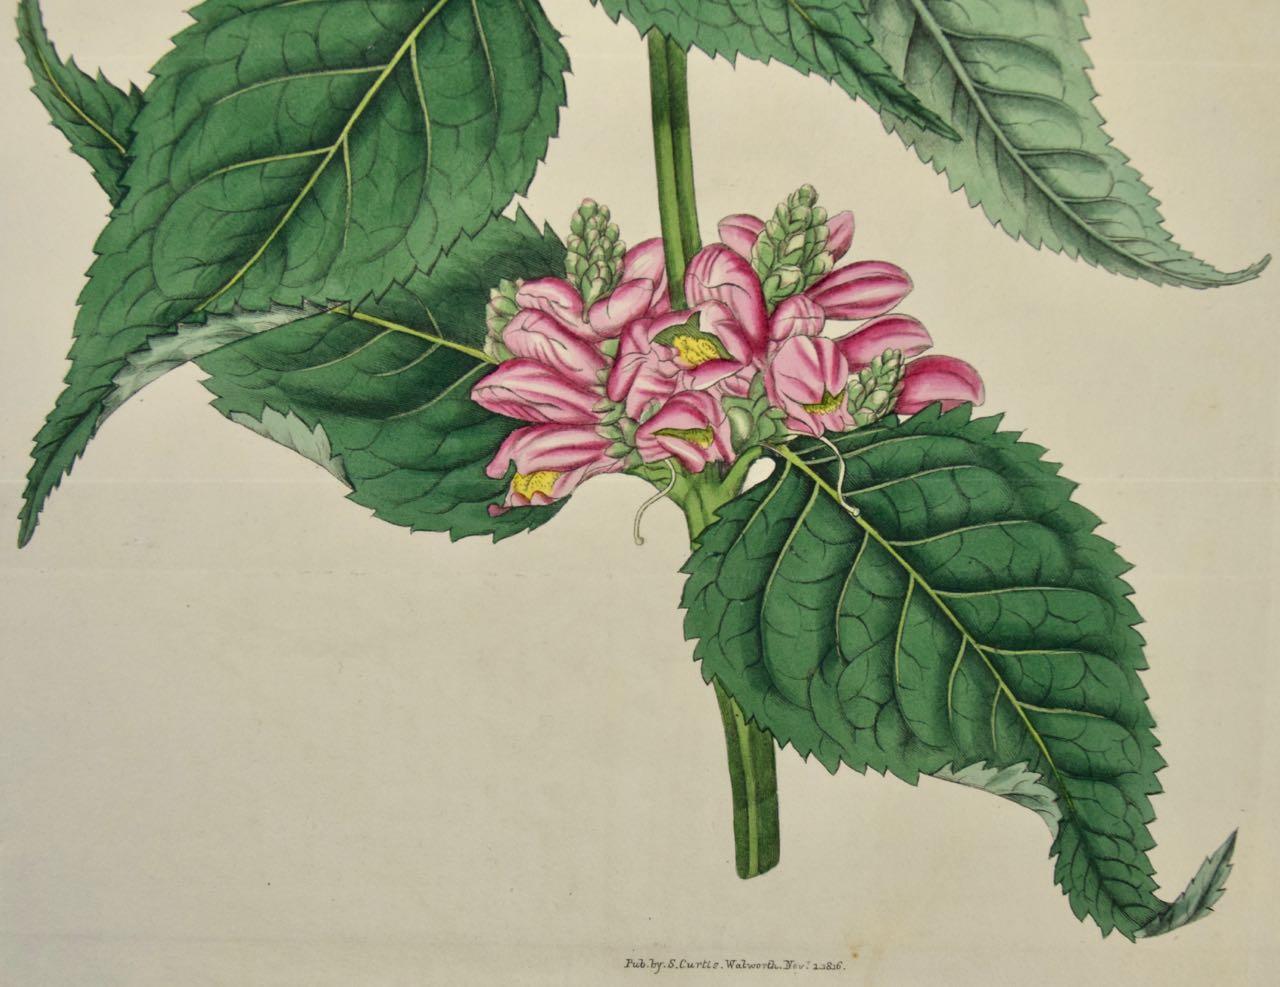 Flowering Lyons' Chelone Botanical: A 19th C. Hand-colored Engraving by Curtis - Naturalistic Print by William Curtis